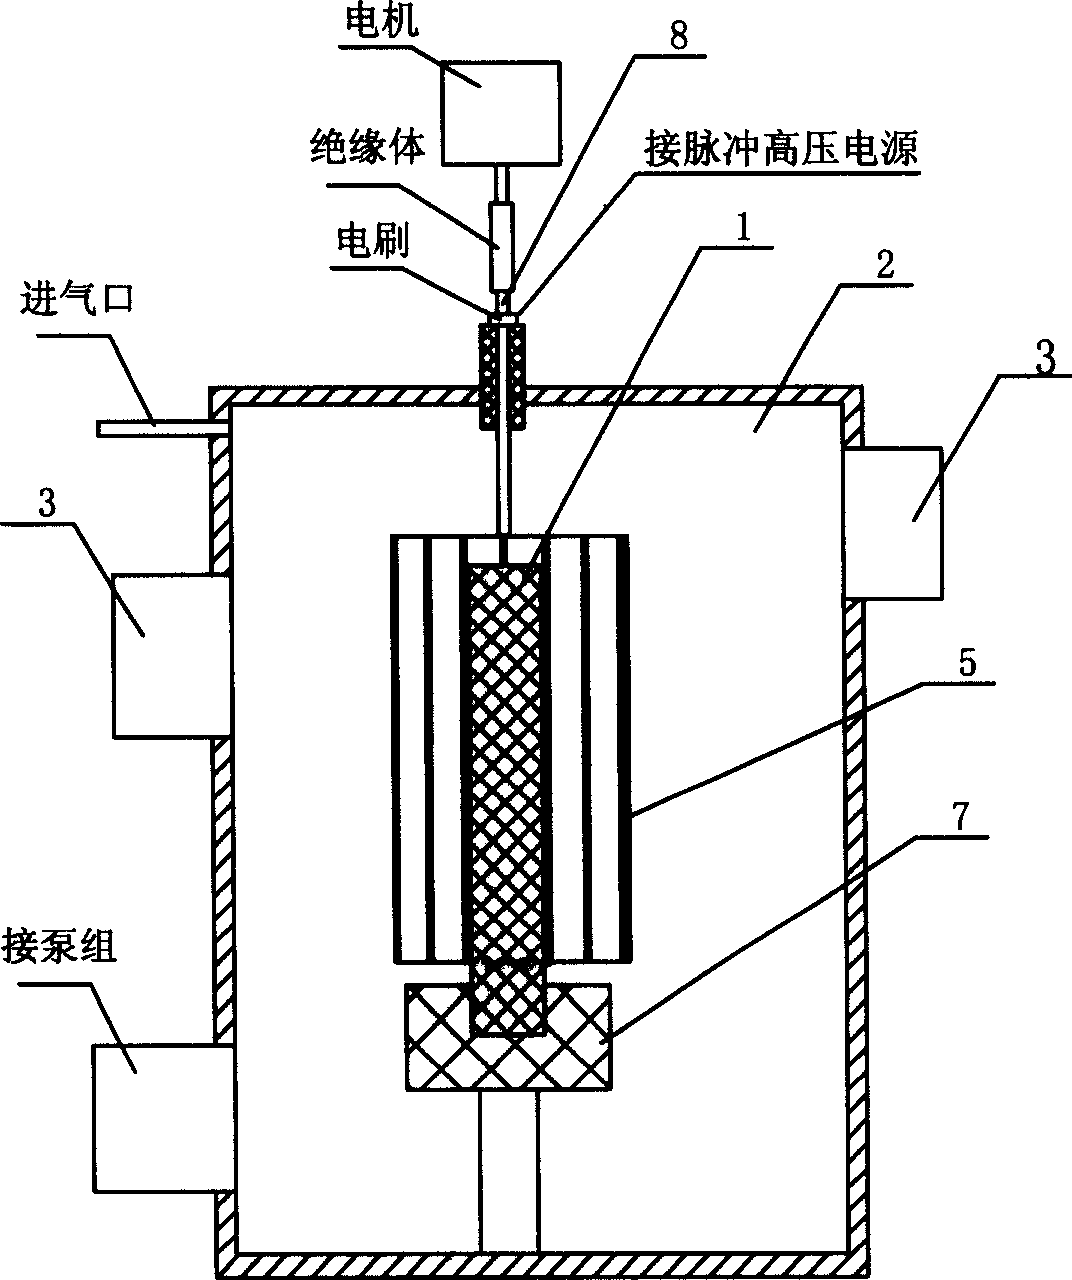 Plasma injection method and apparatus for insulation material spare parts